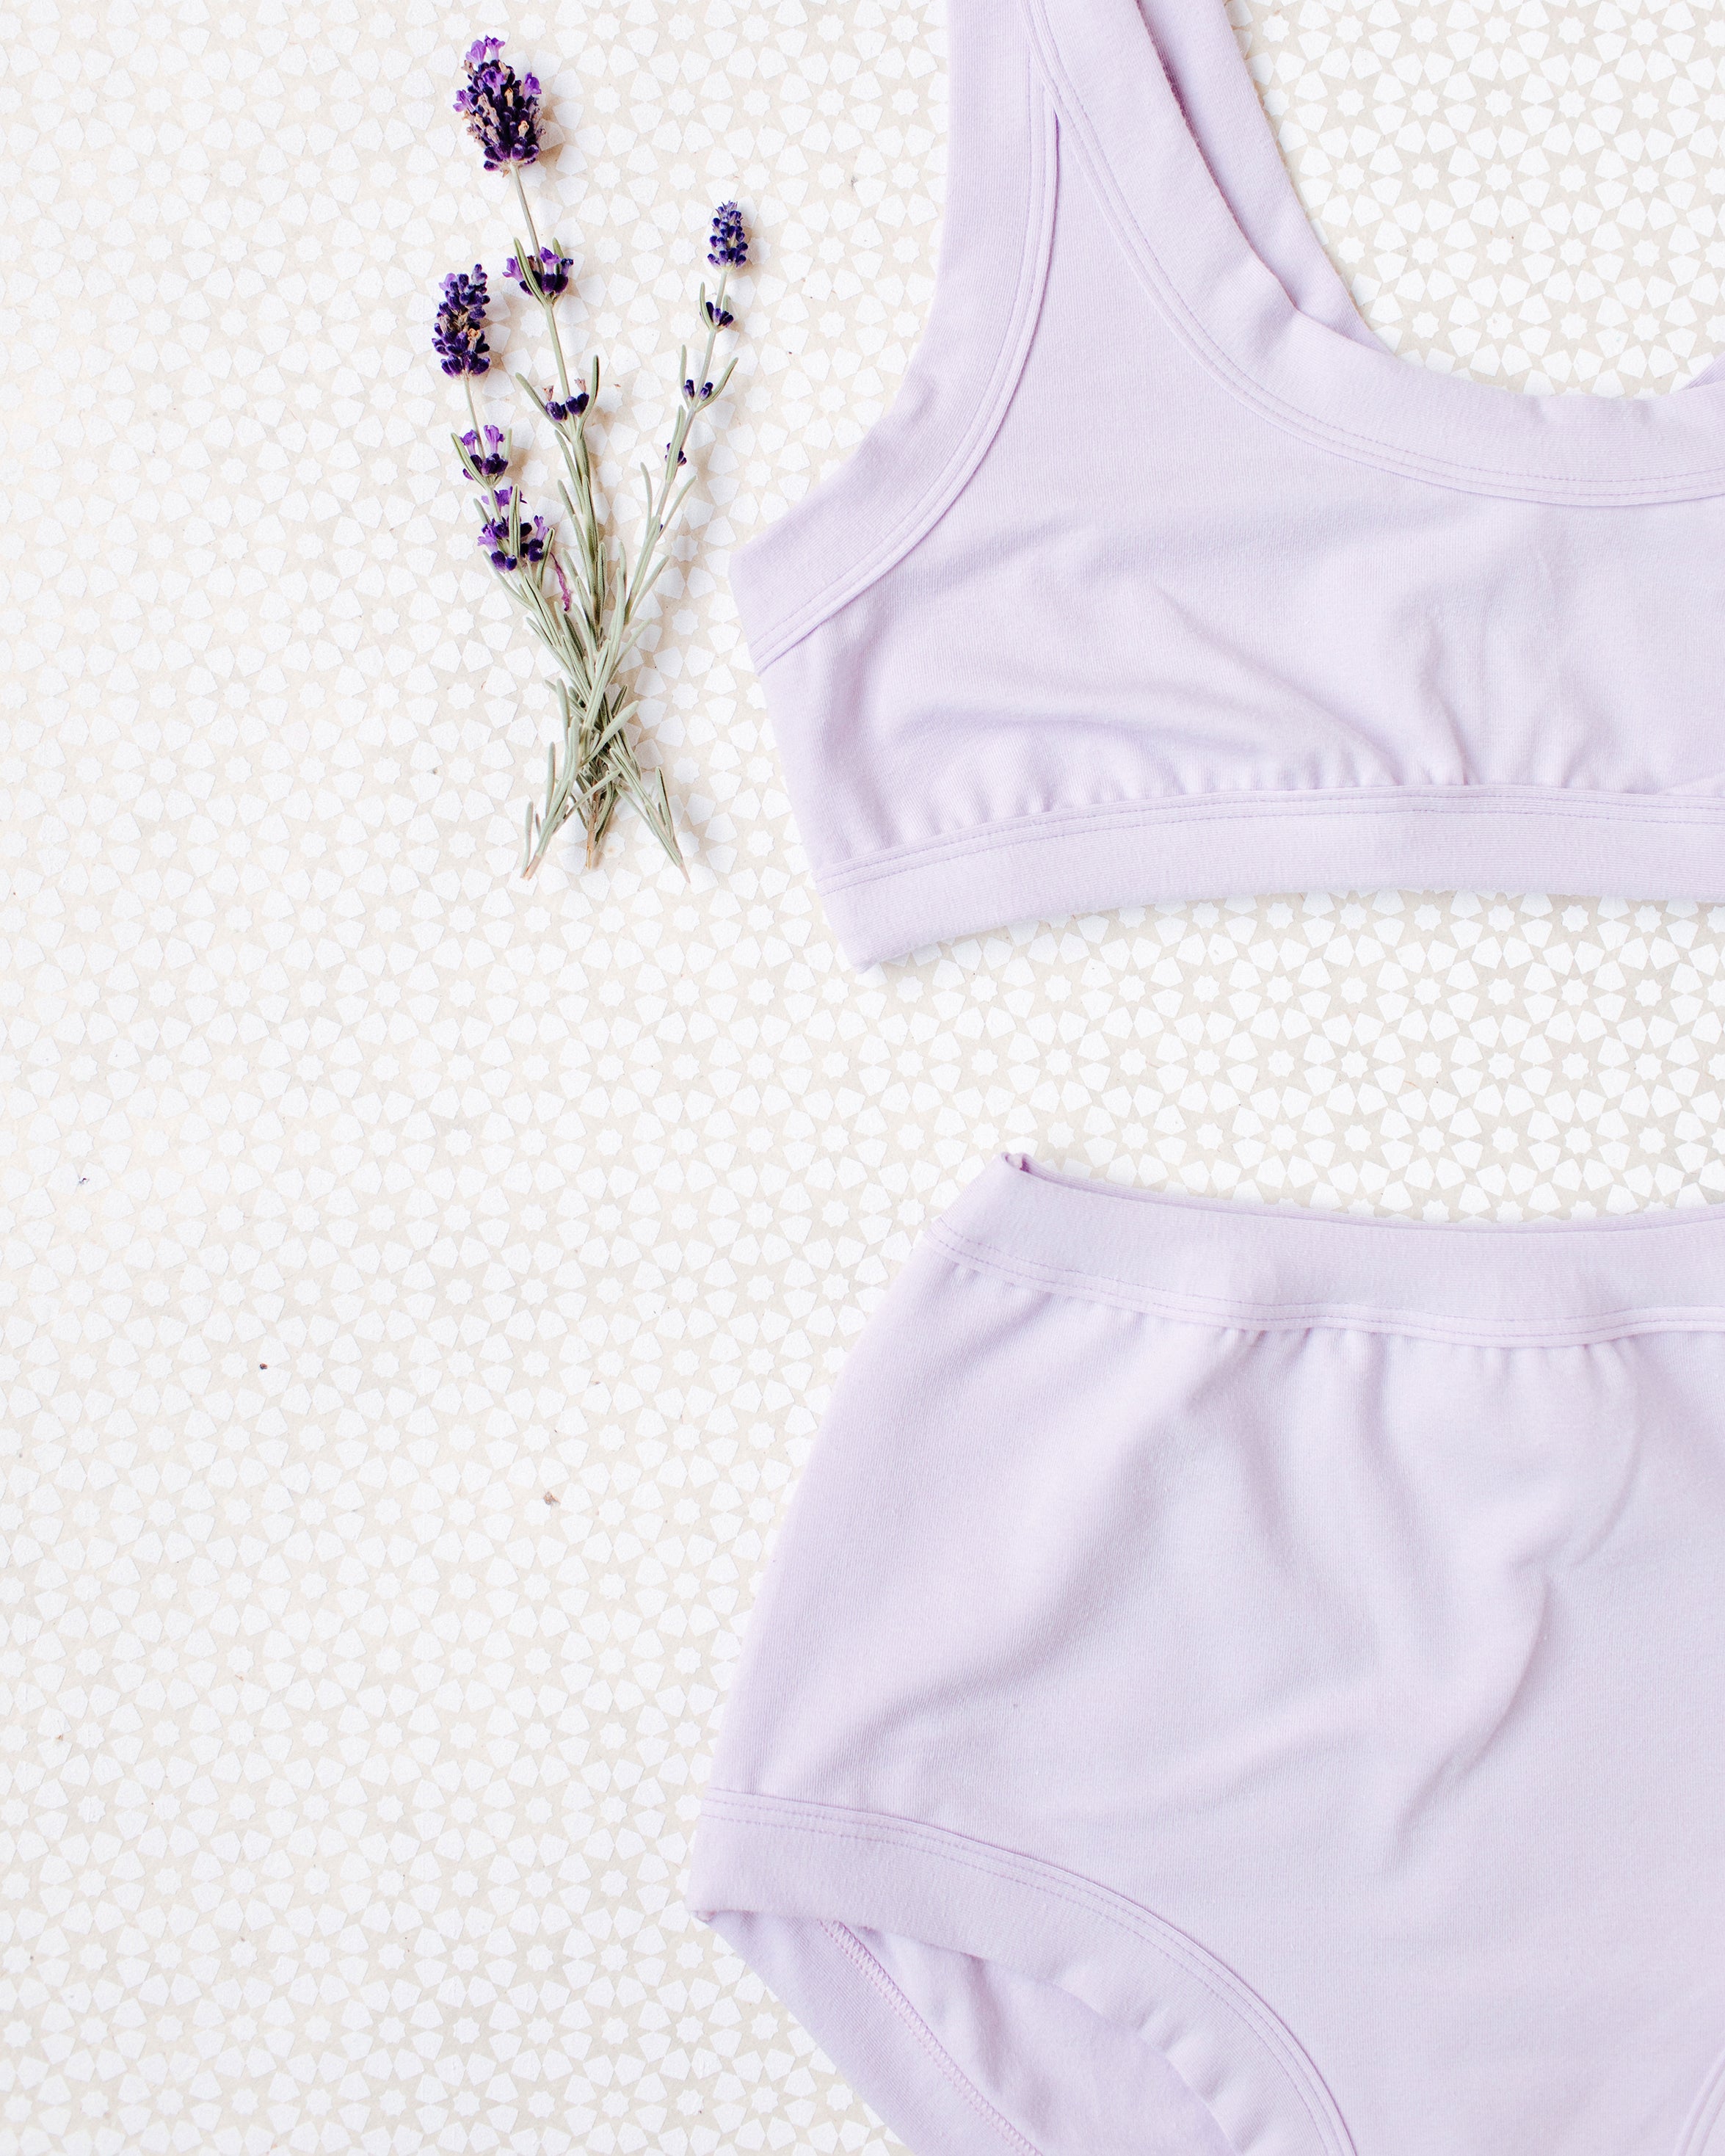 Close up flat lay of Light Lavender Original style underwear and Bralette on a white patterned surface with lavender sprigs.